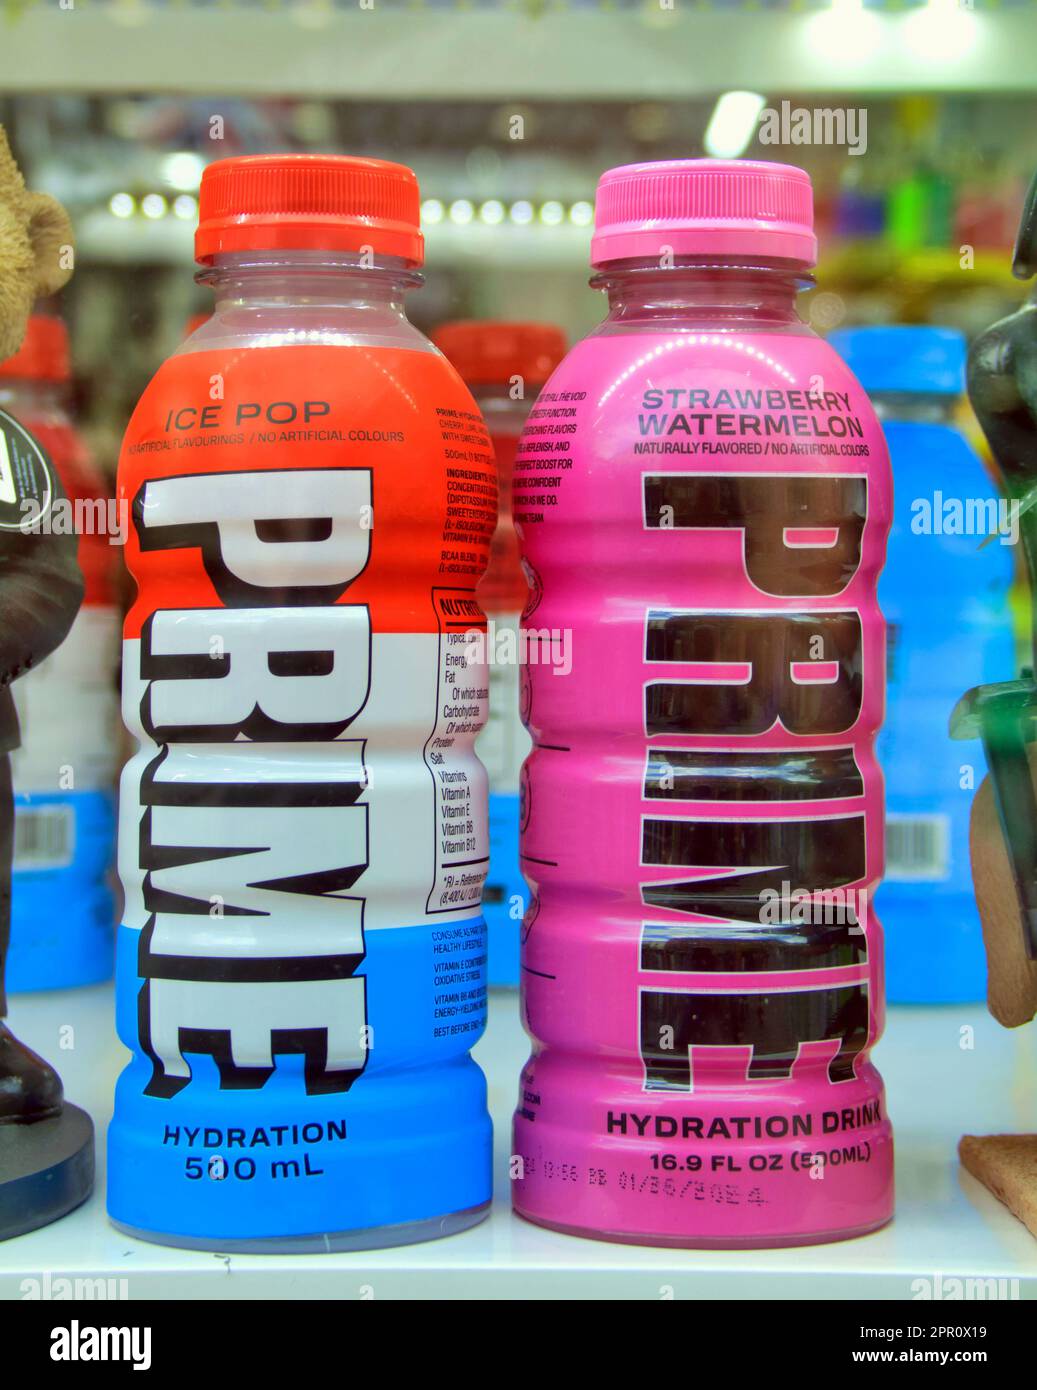 KSI's Prime Hydration: Is It Worth the Hype?